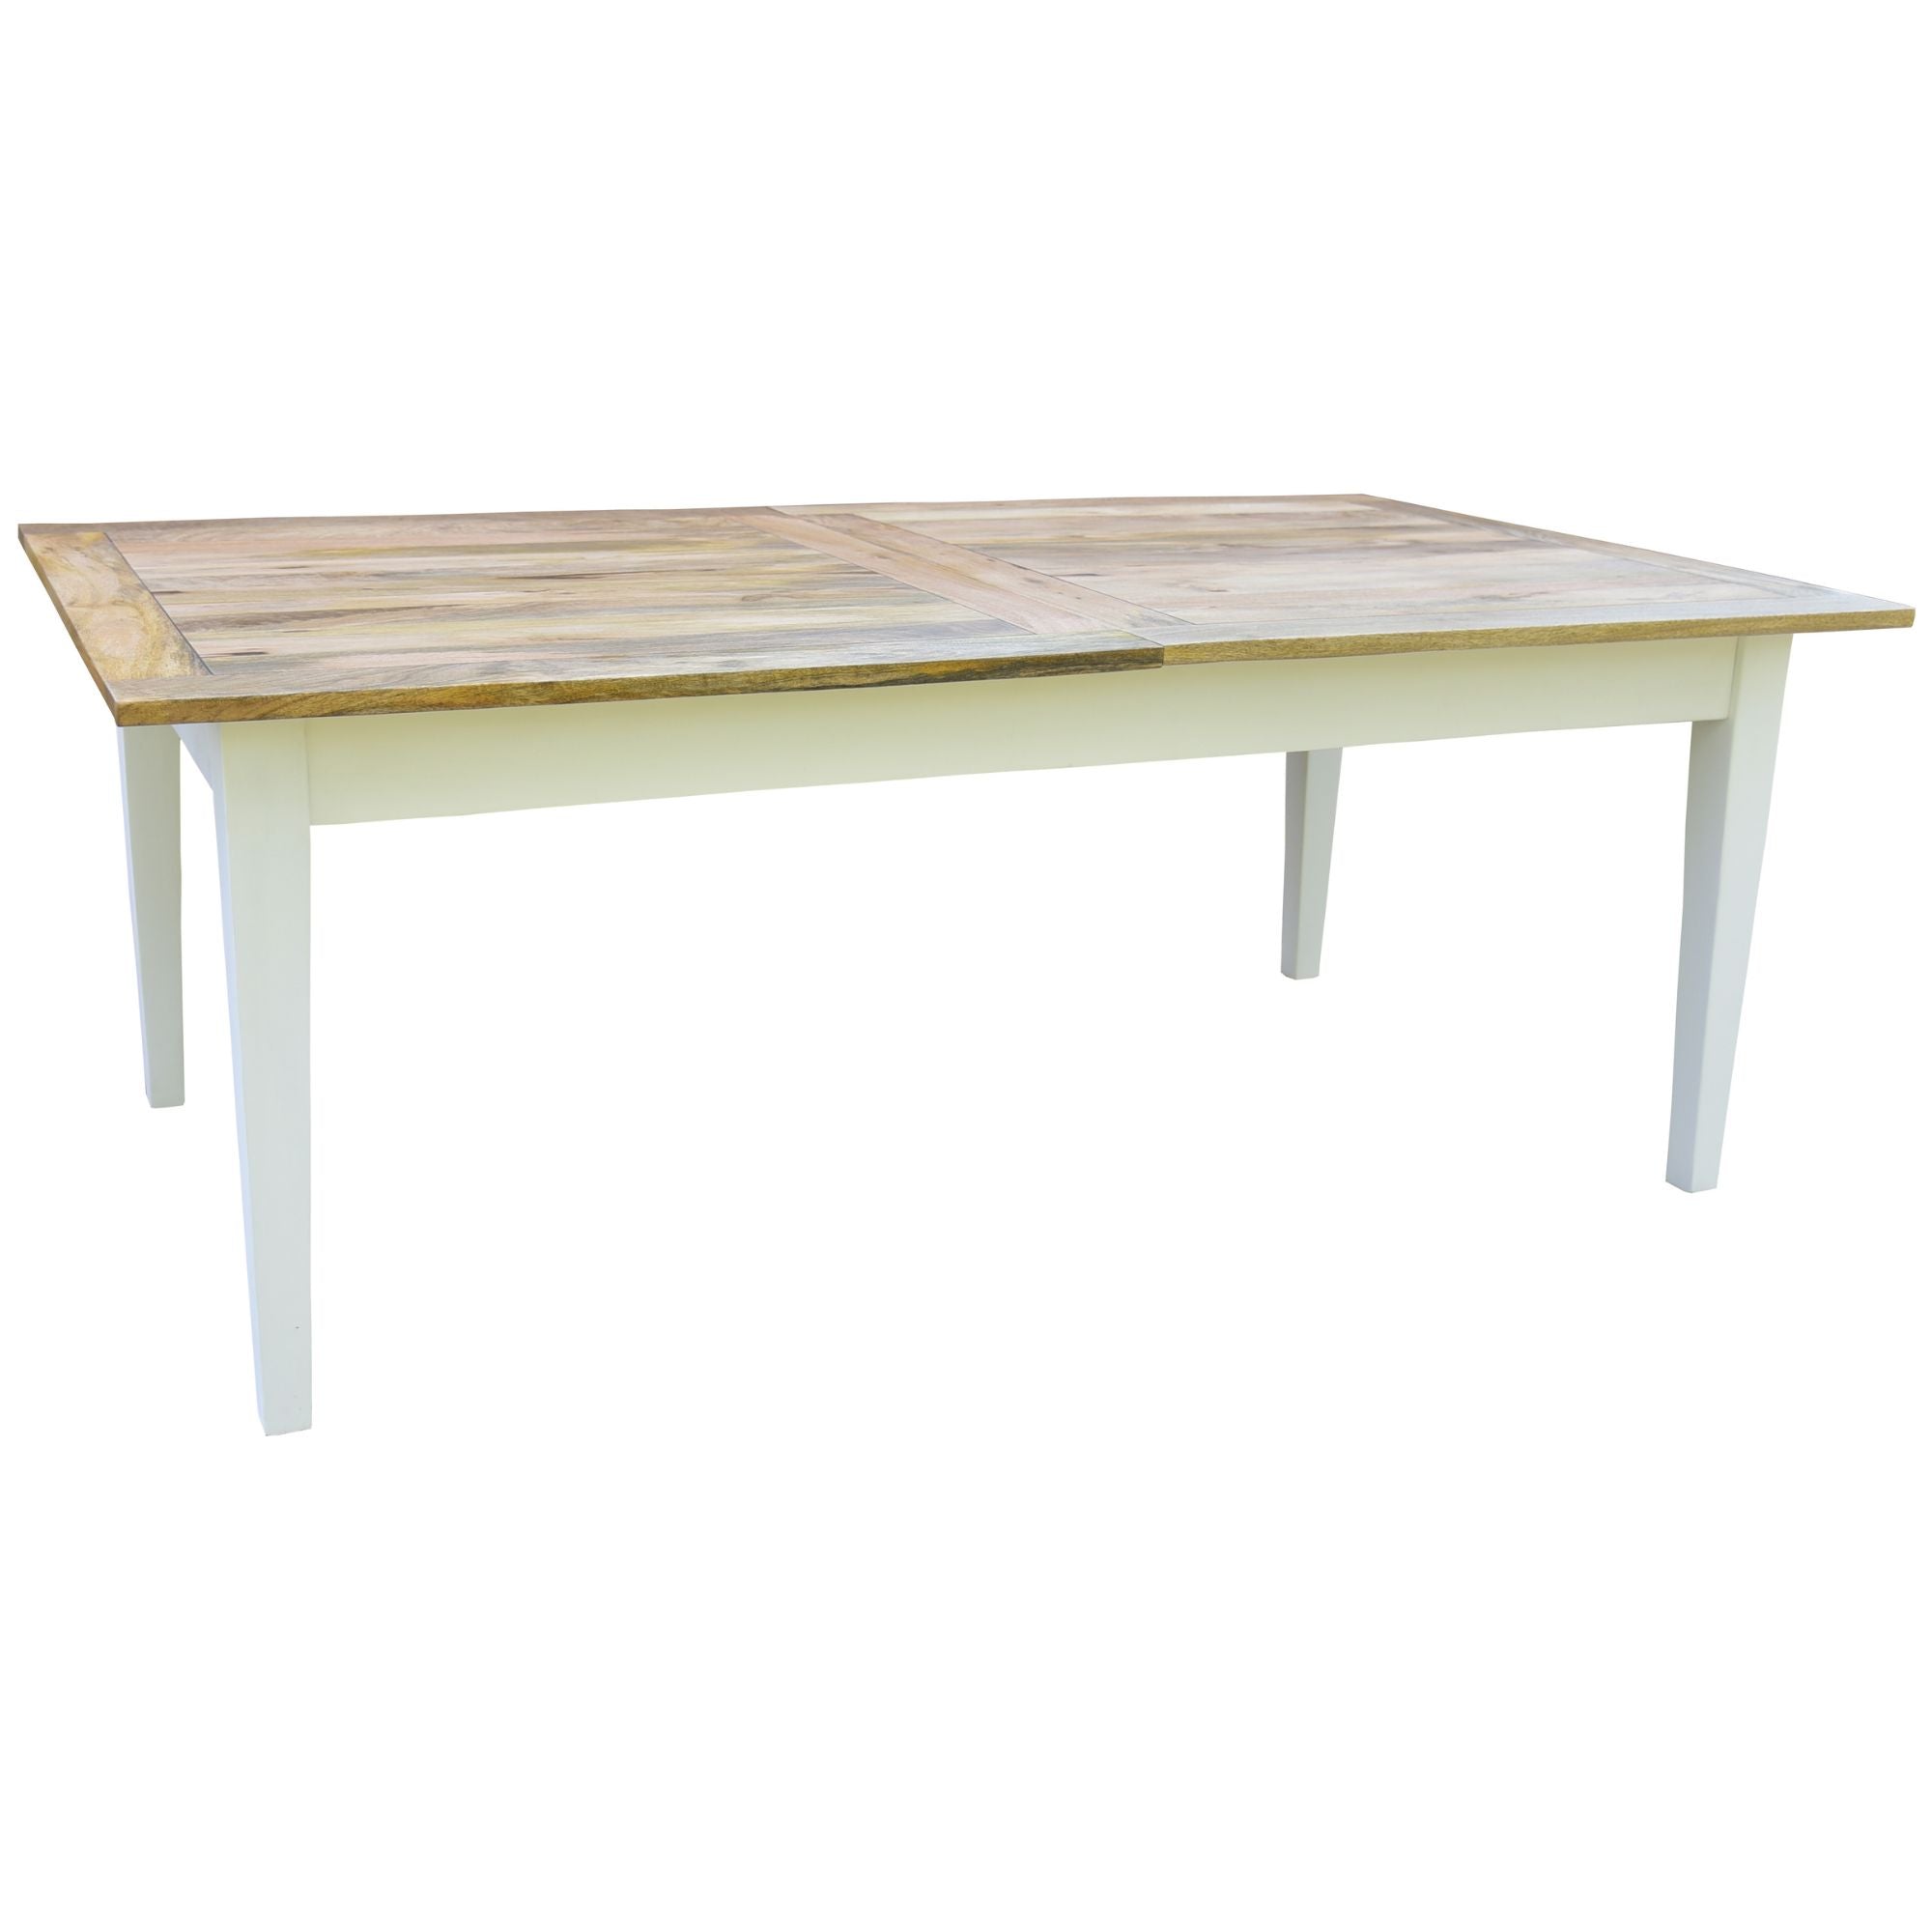 Extendable Dining Table 170 - 250Cm Mango Wood Modern Furniture